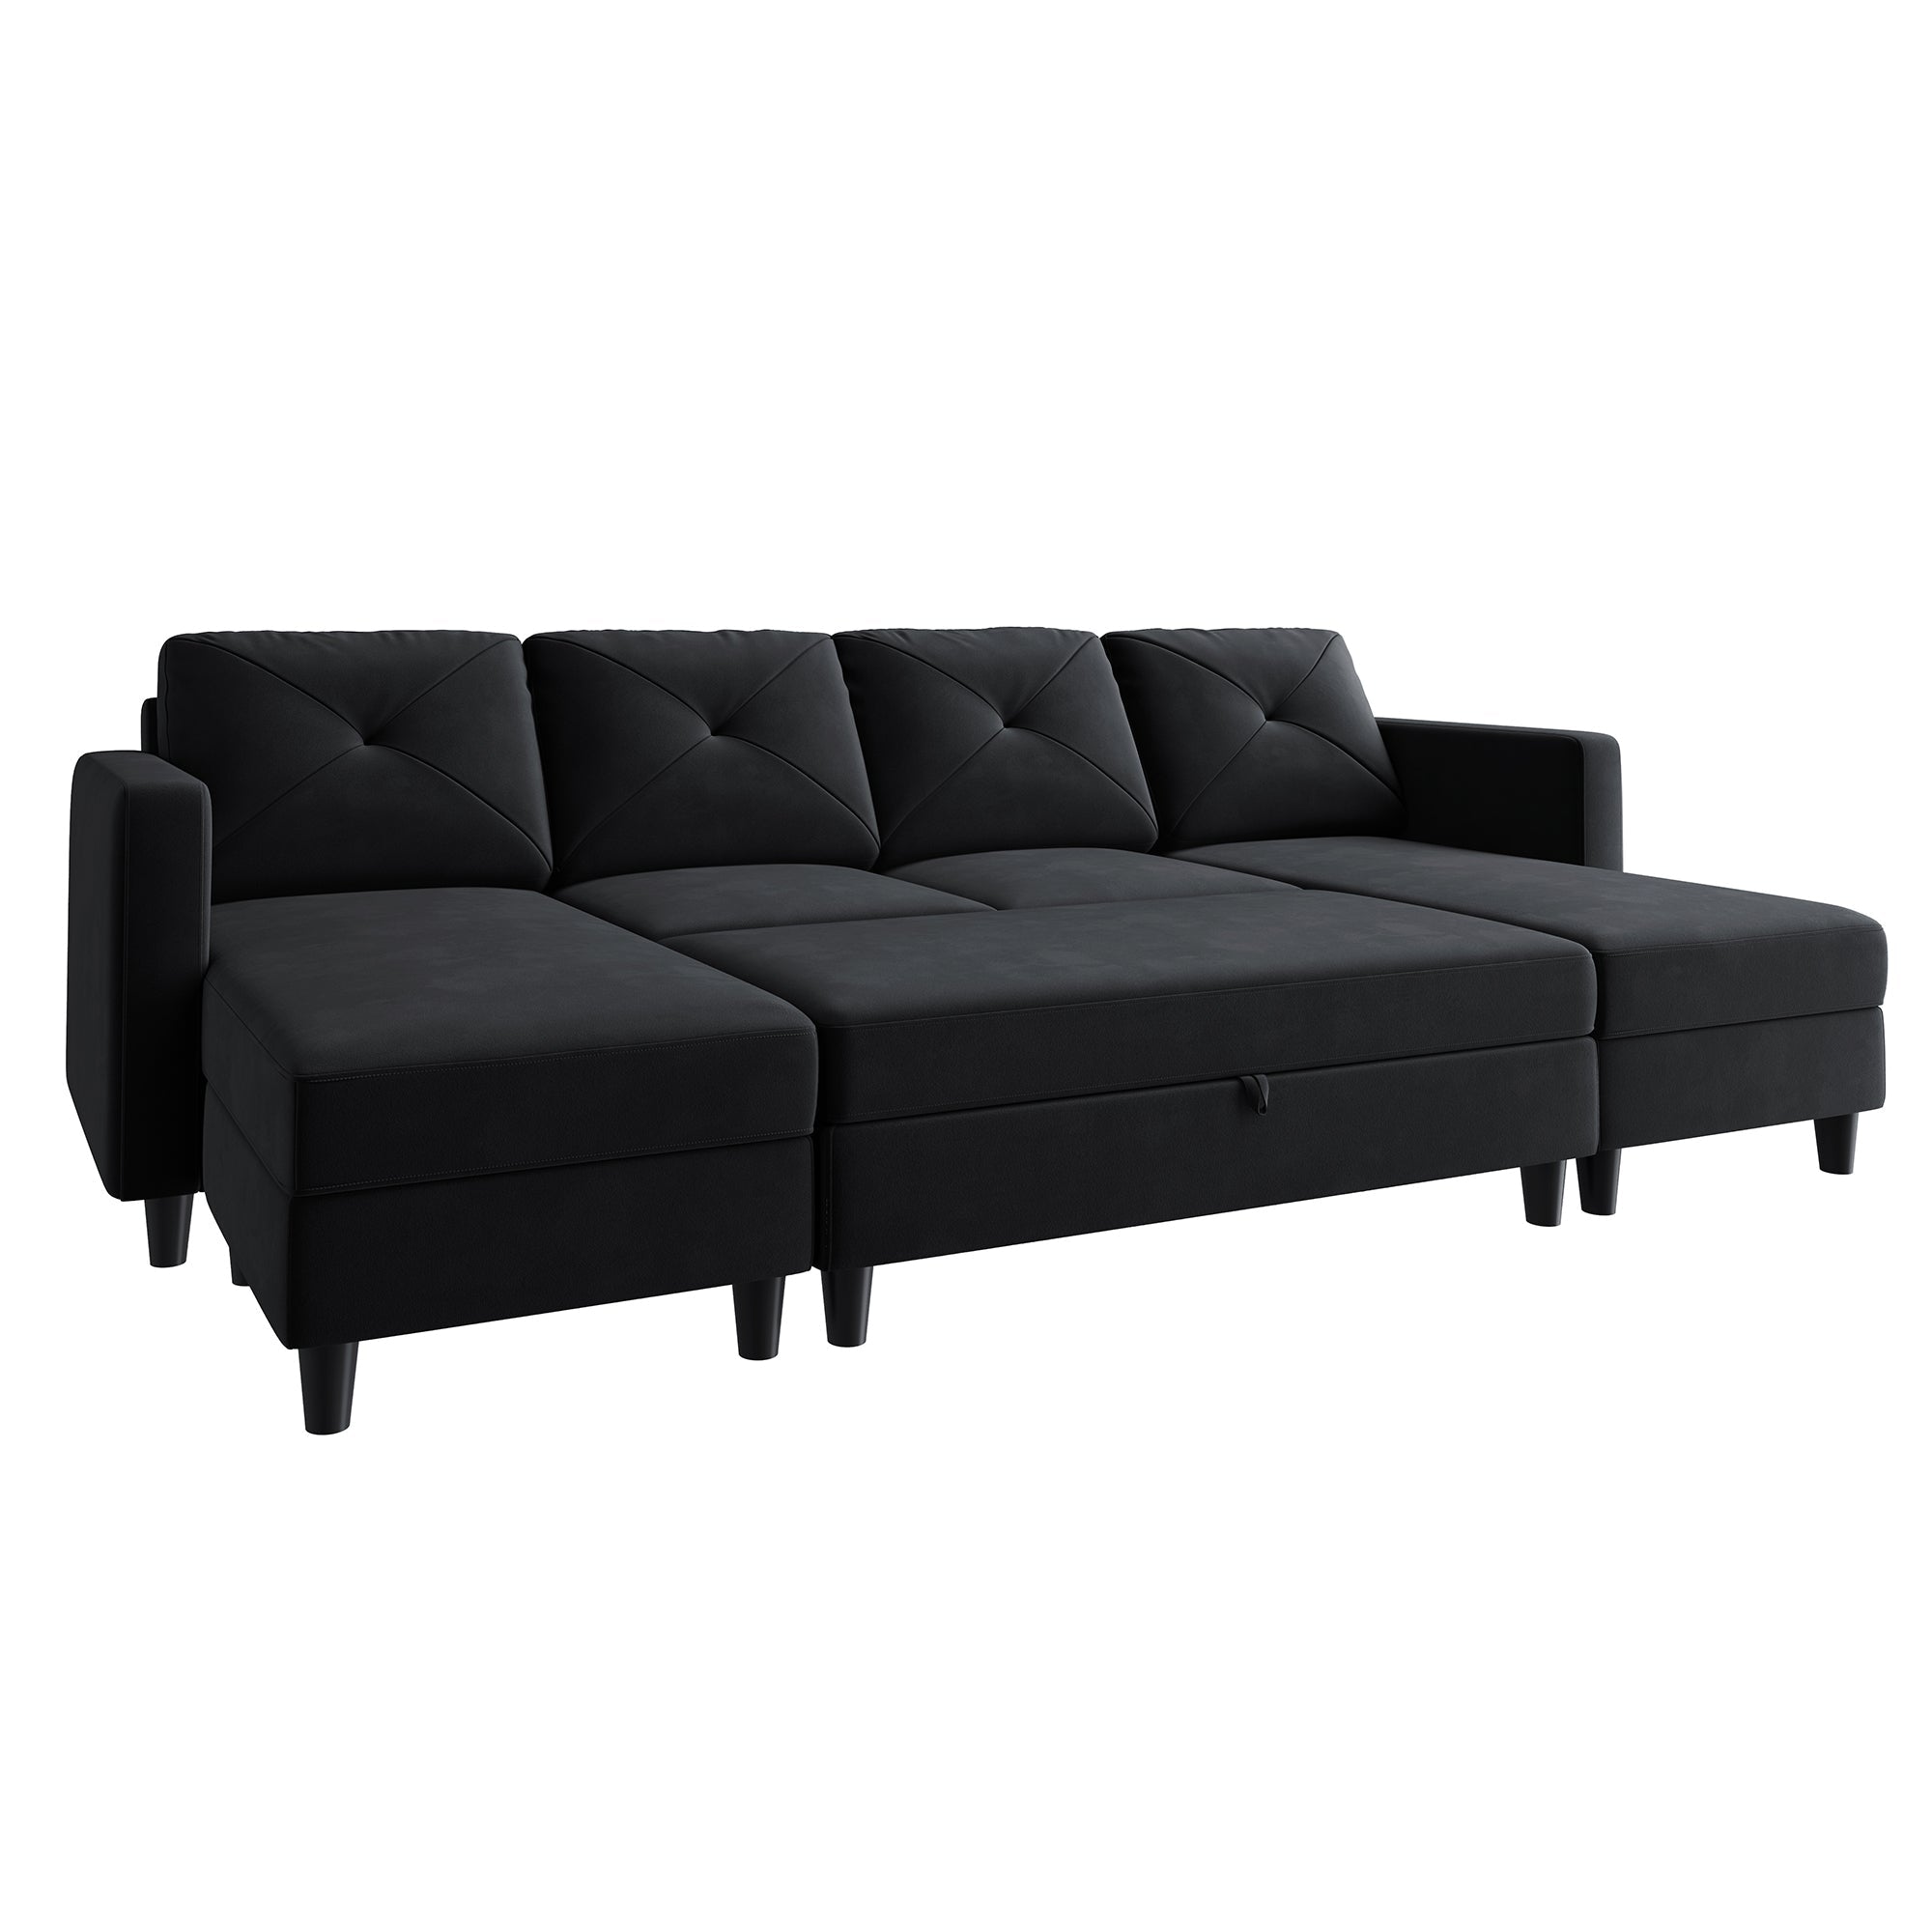 HONBAY 6-Piece Velvet Convertible Sleeper Sectional With Storage Ottoman